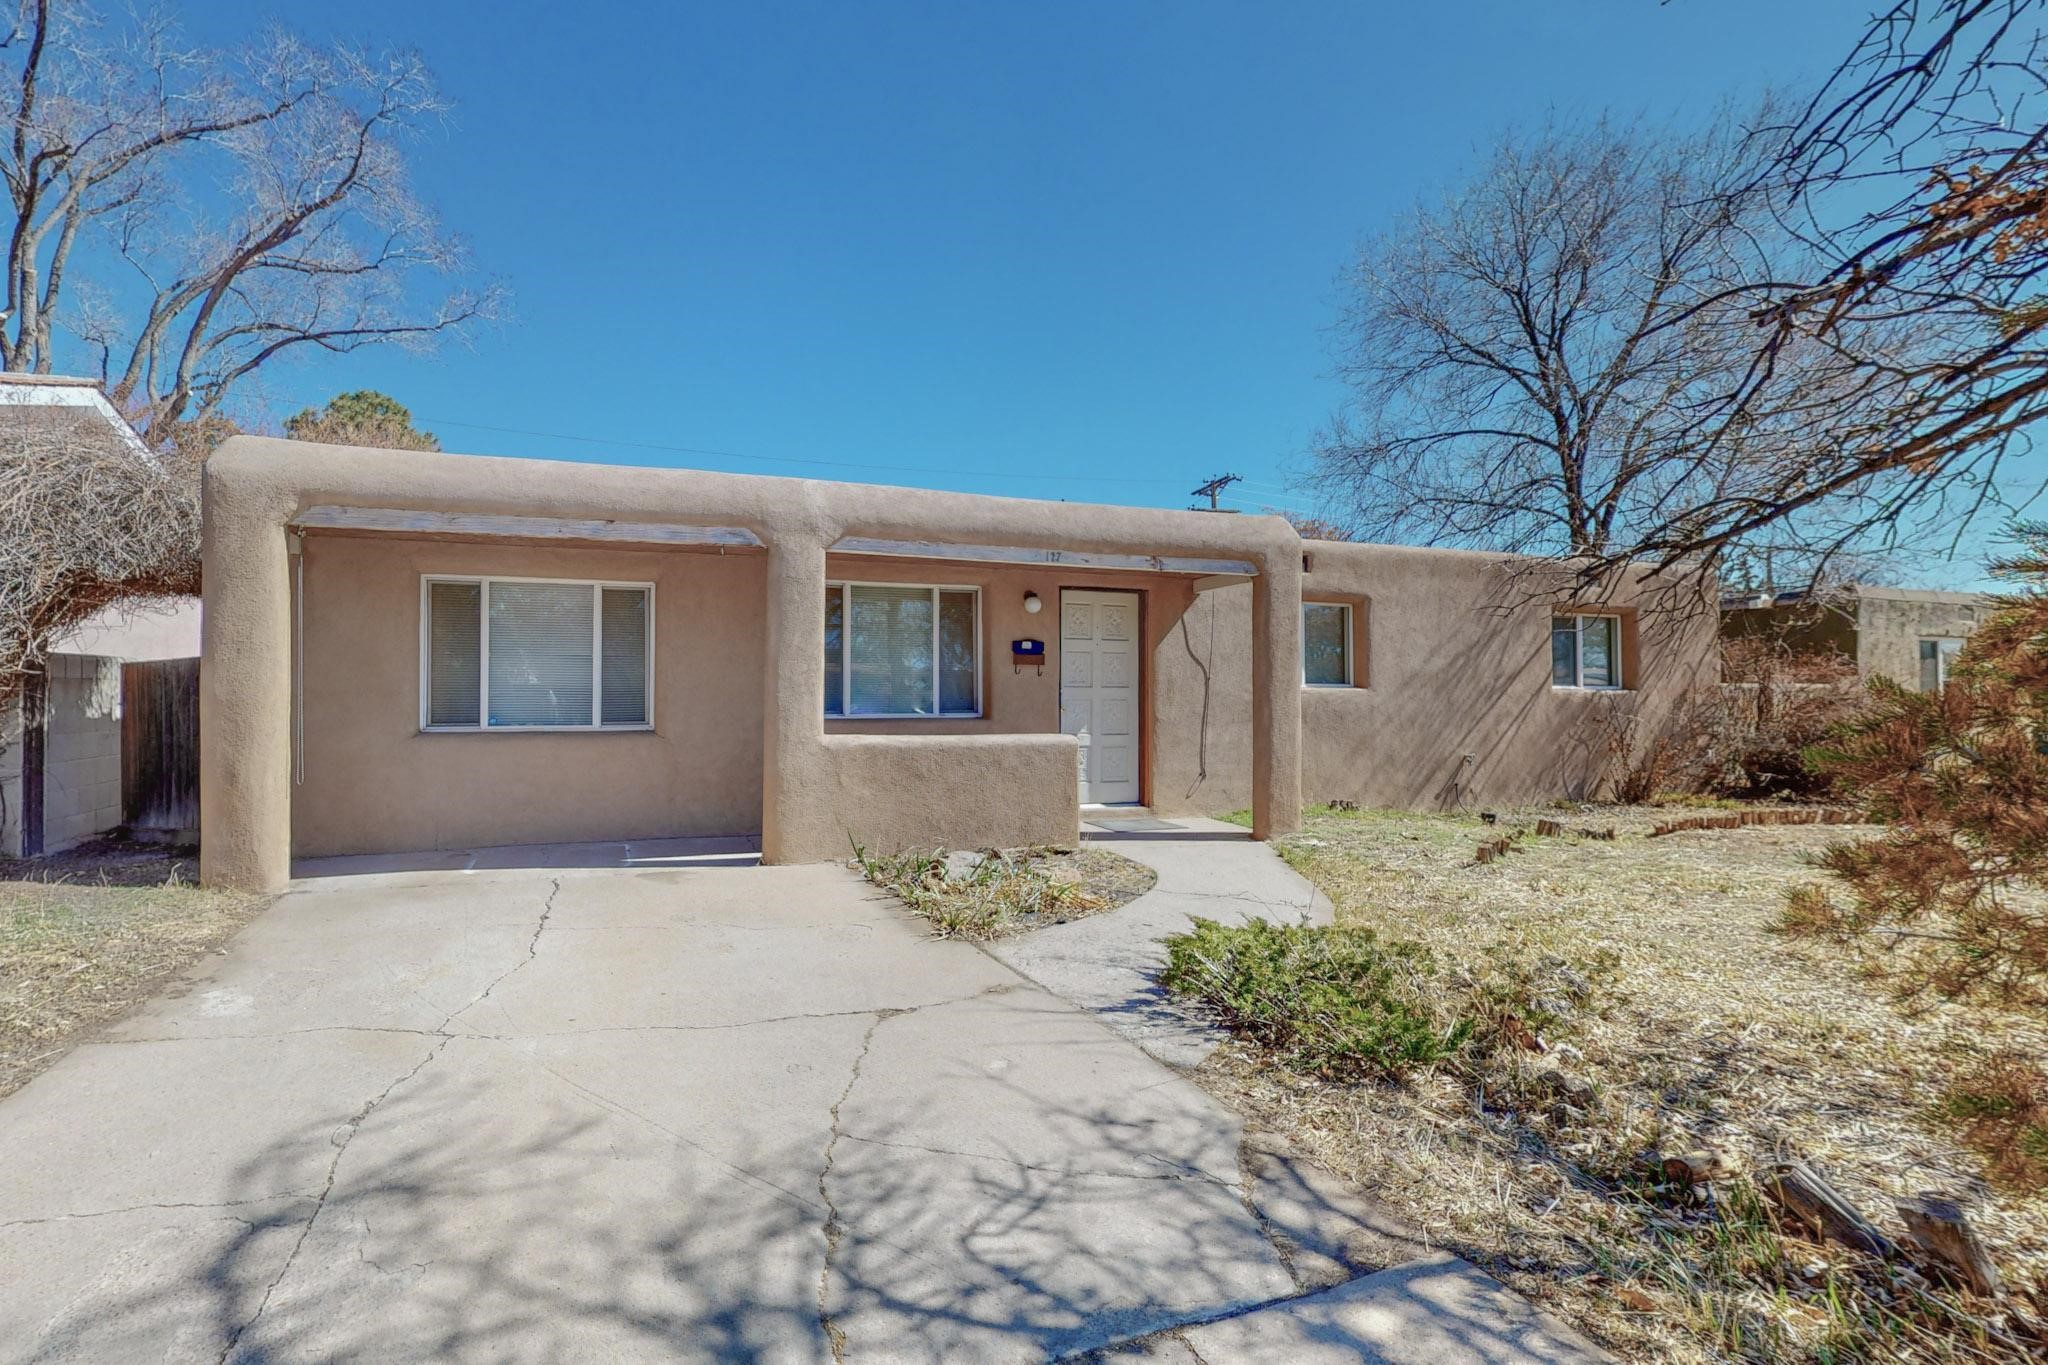 127 Spruce Street, Santa Fe, New Mexico 87501, 3 Bedrooms Bedrooms, ,1 BathroomBathrooms,Residential,For Sale,127 Spruce Street,202400673